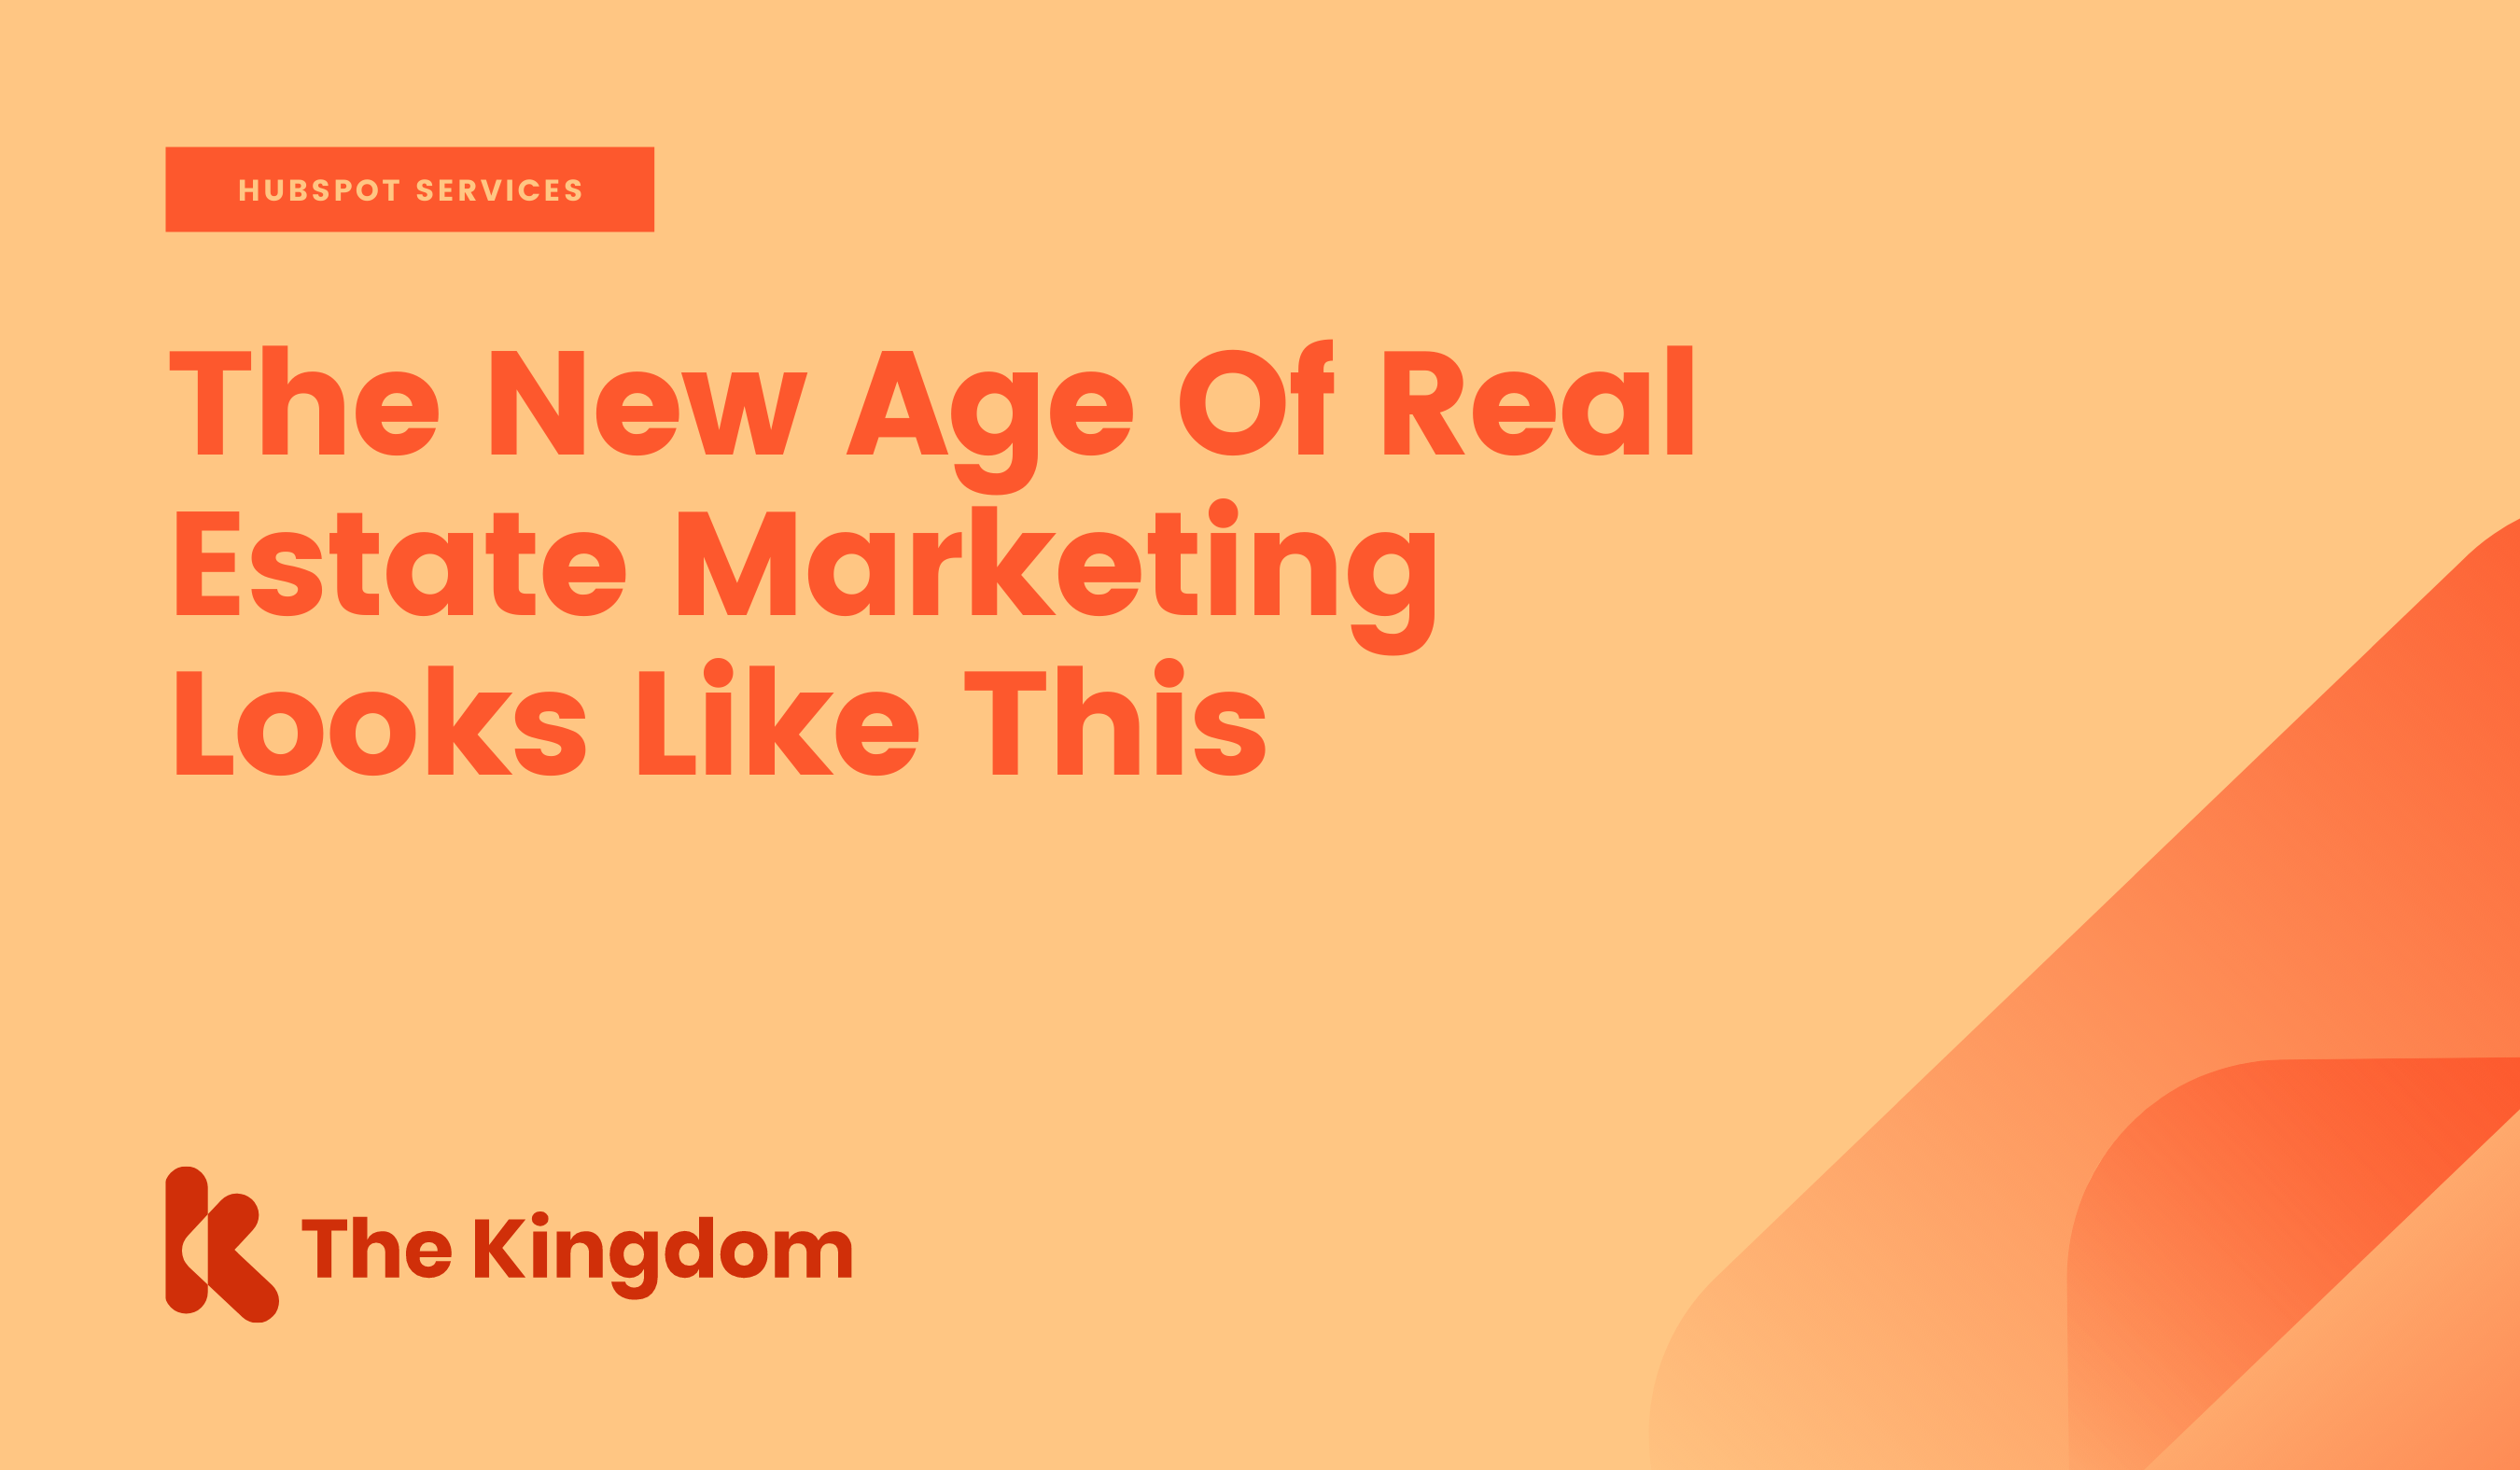 The New Age Of Real Estate Marketing Looks Like This